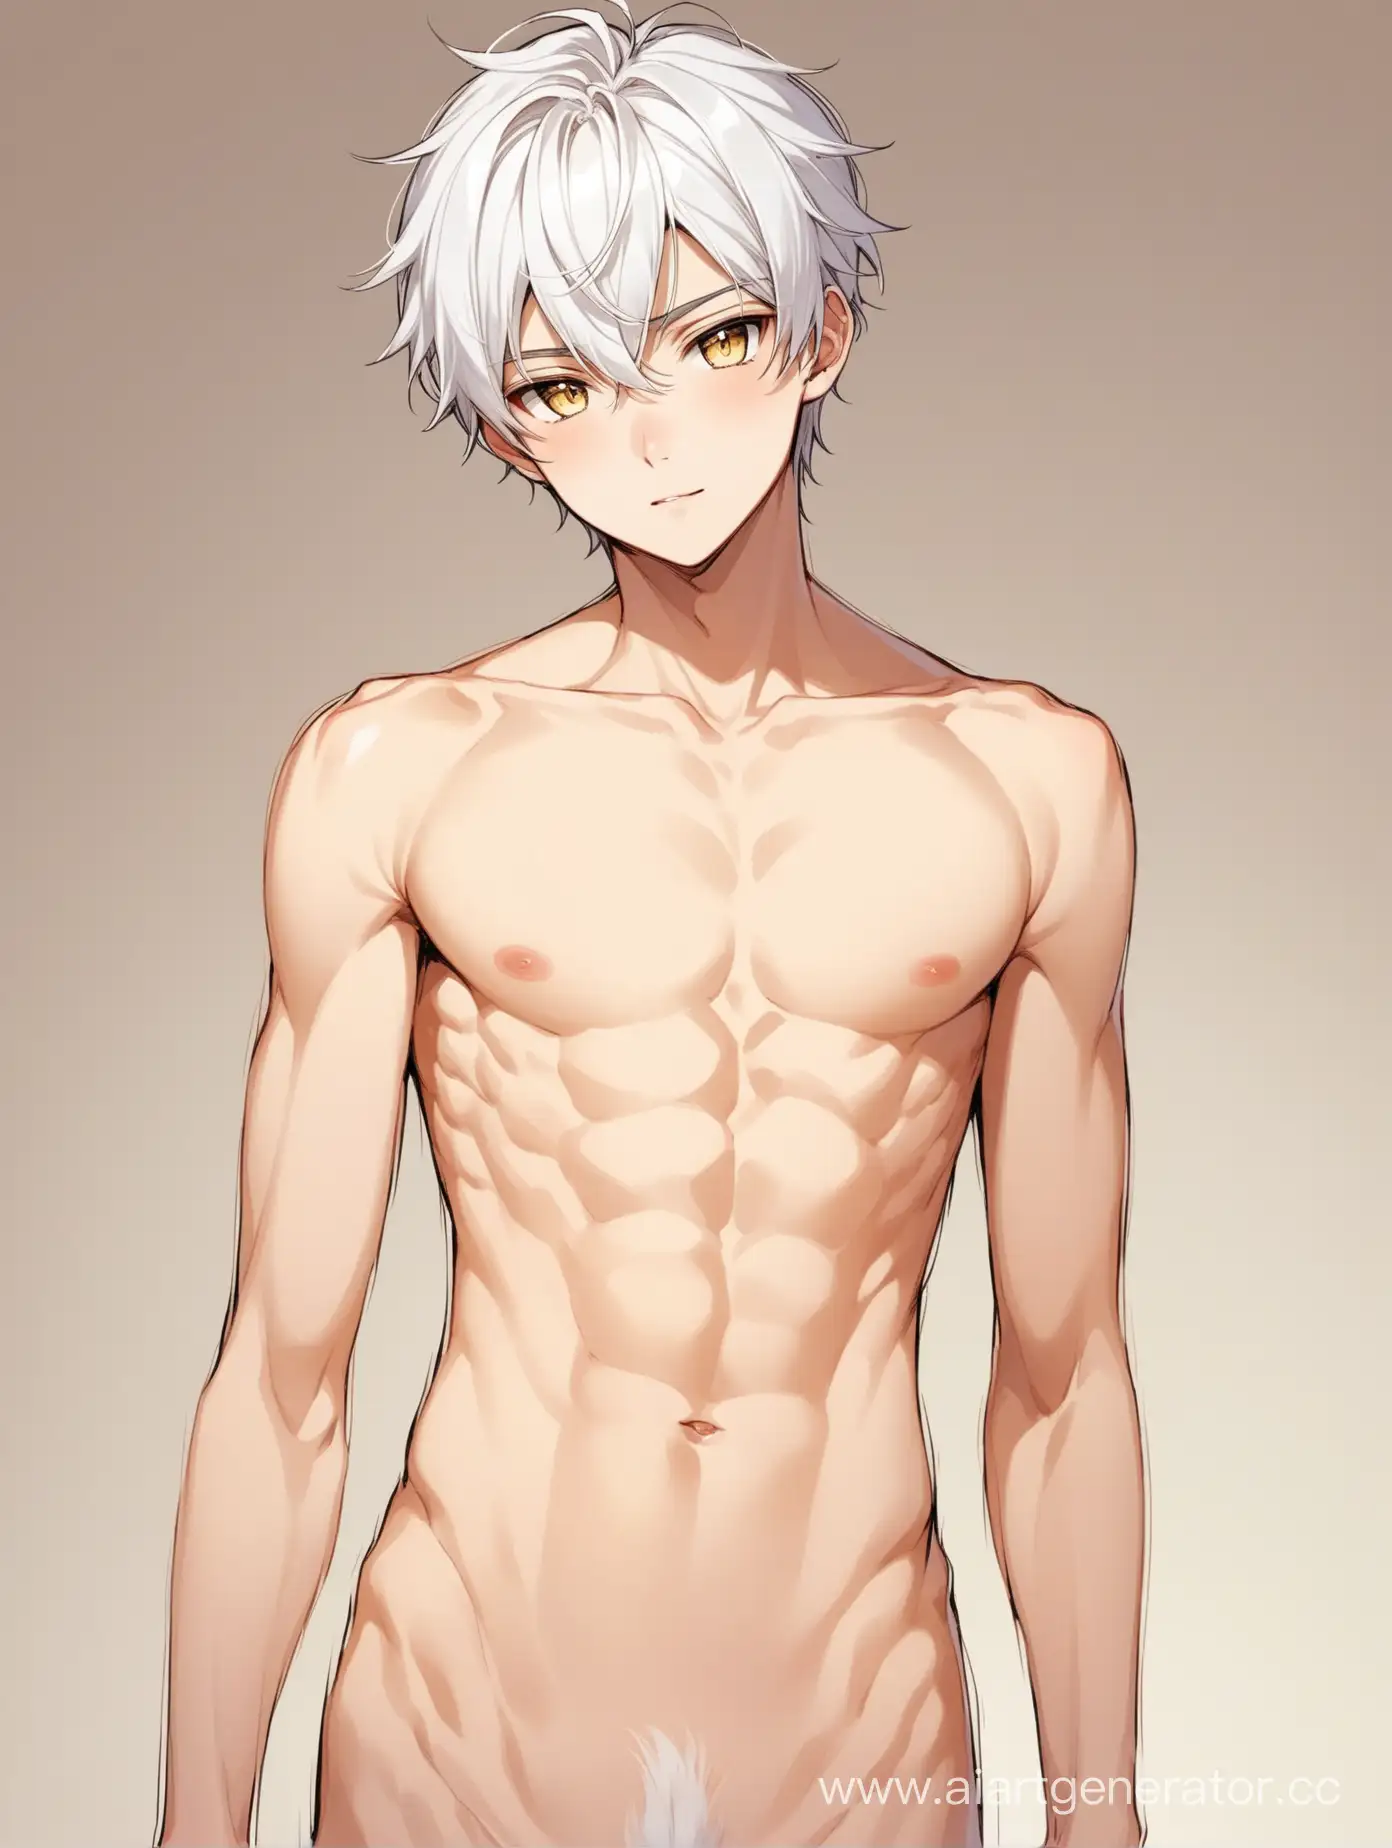 An 18-year-old boy with white hair and golden eyes. Bright skin. The physique is fragile, refined and graceful. A sweet and handsome boy with a cute face, slender and beautiful body. He is 165 centimeters (5ft 5in) tall and weighs 60 kilograms (132.28Ibs). Twink. His gender is male. Sexy boy